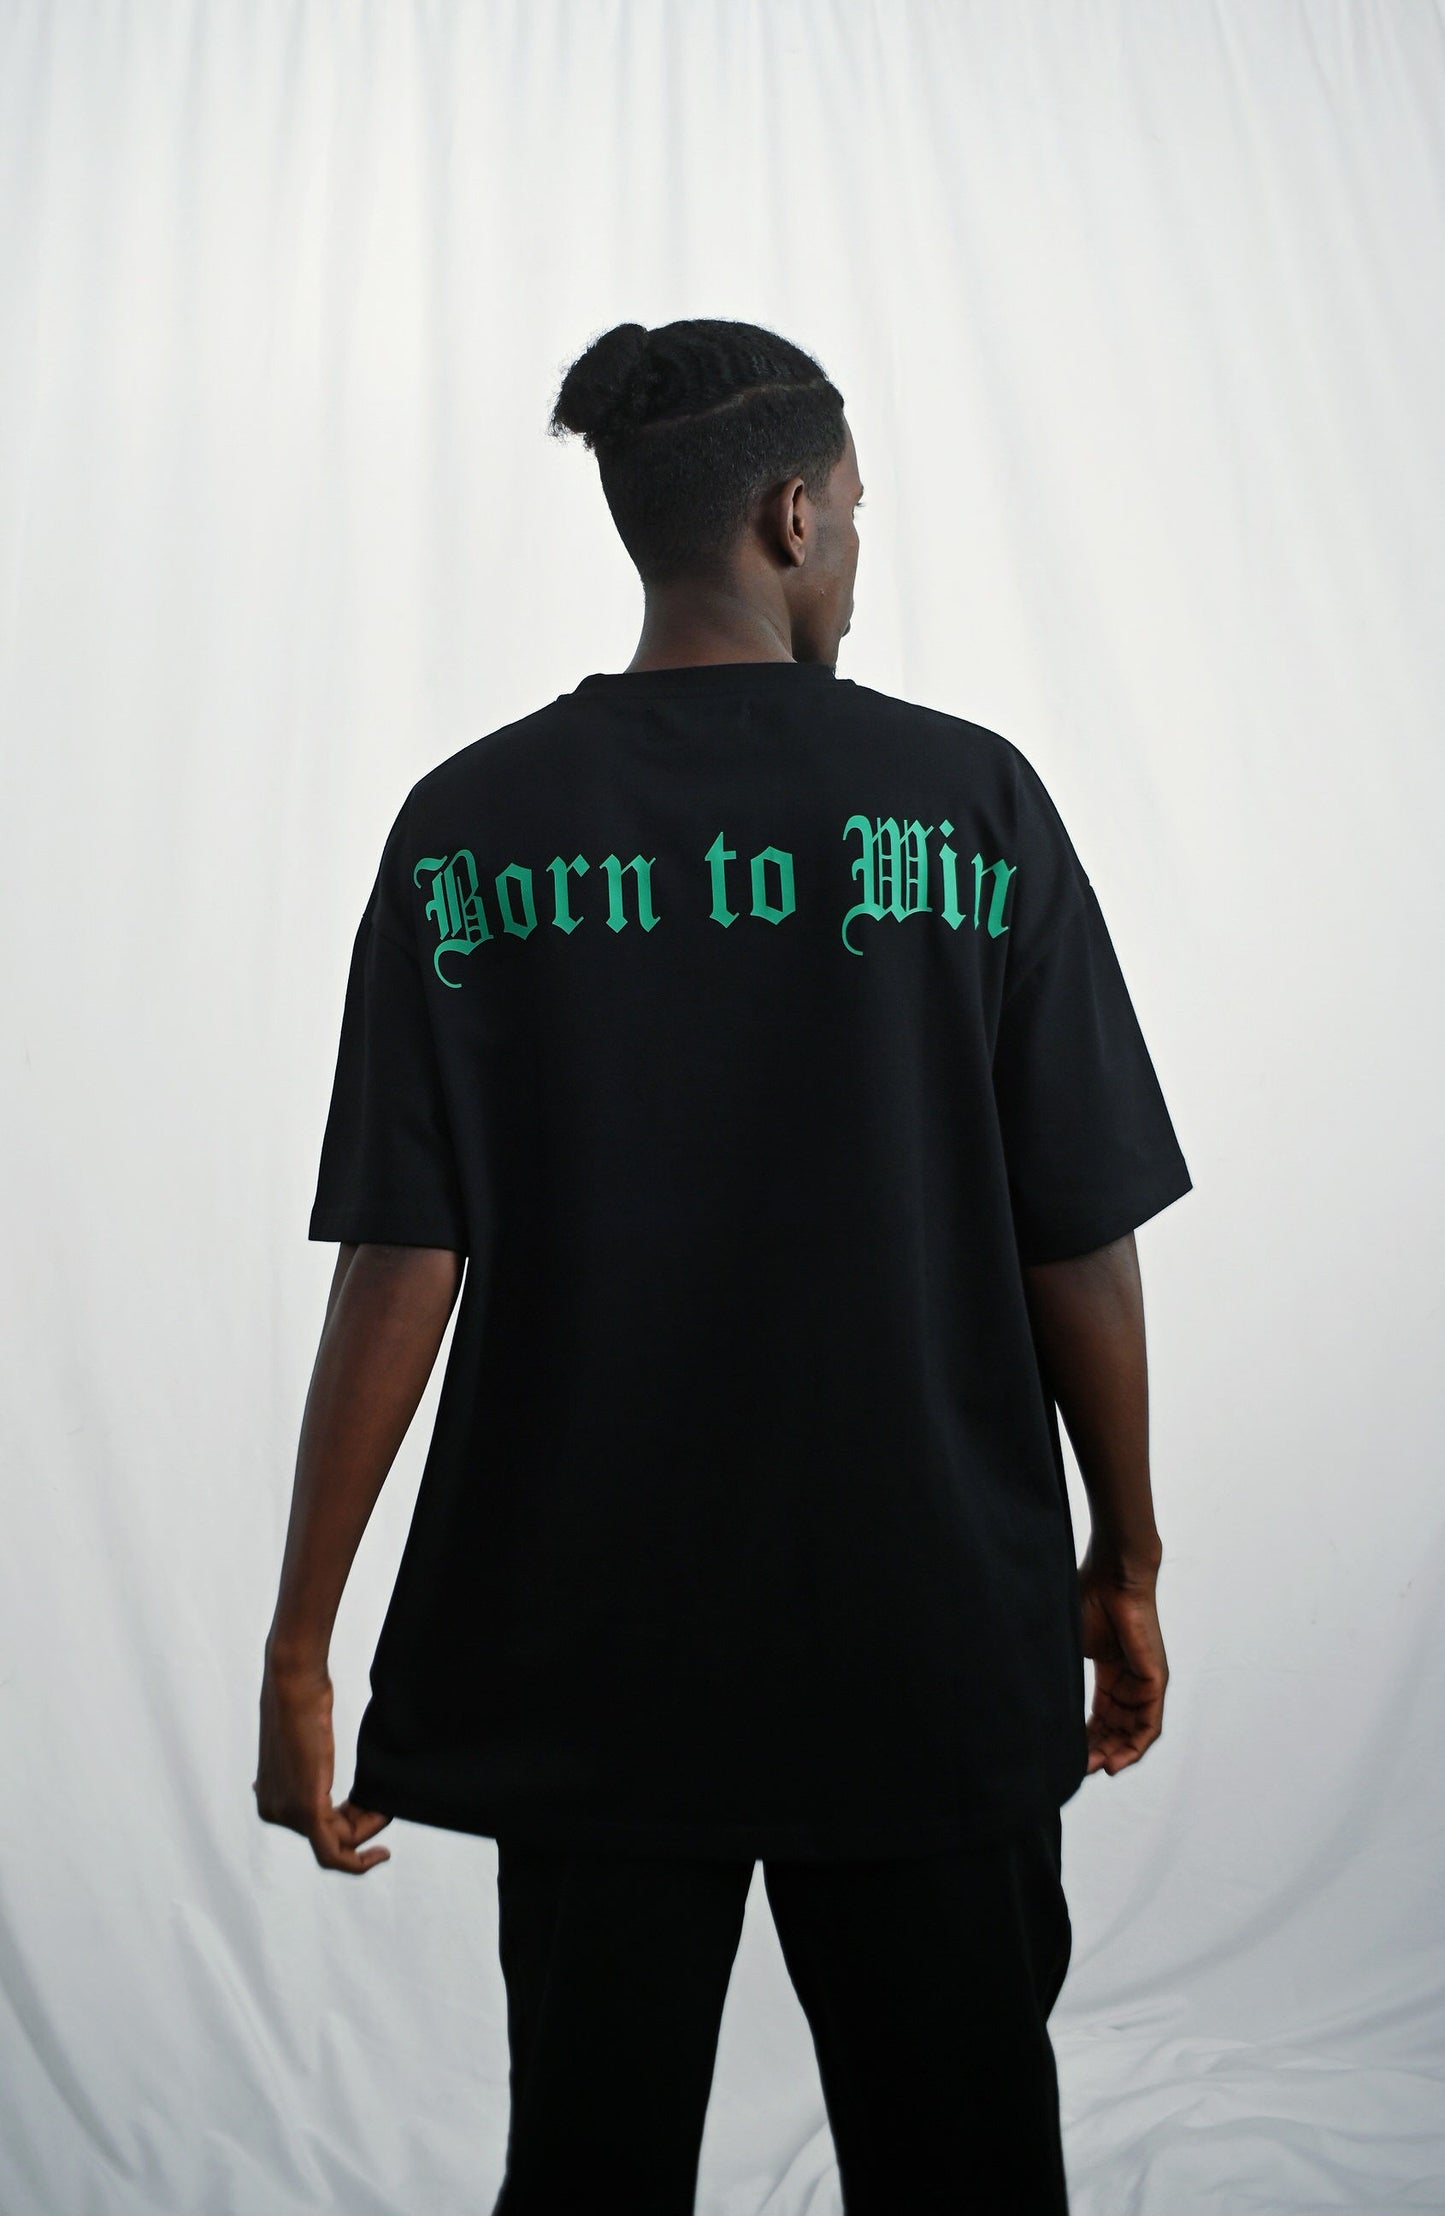 Male model wearing a Black oversize tshirt with green born to win design on the back